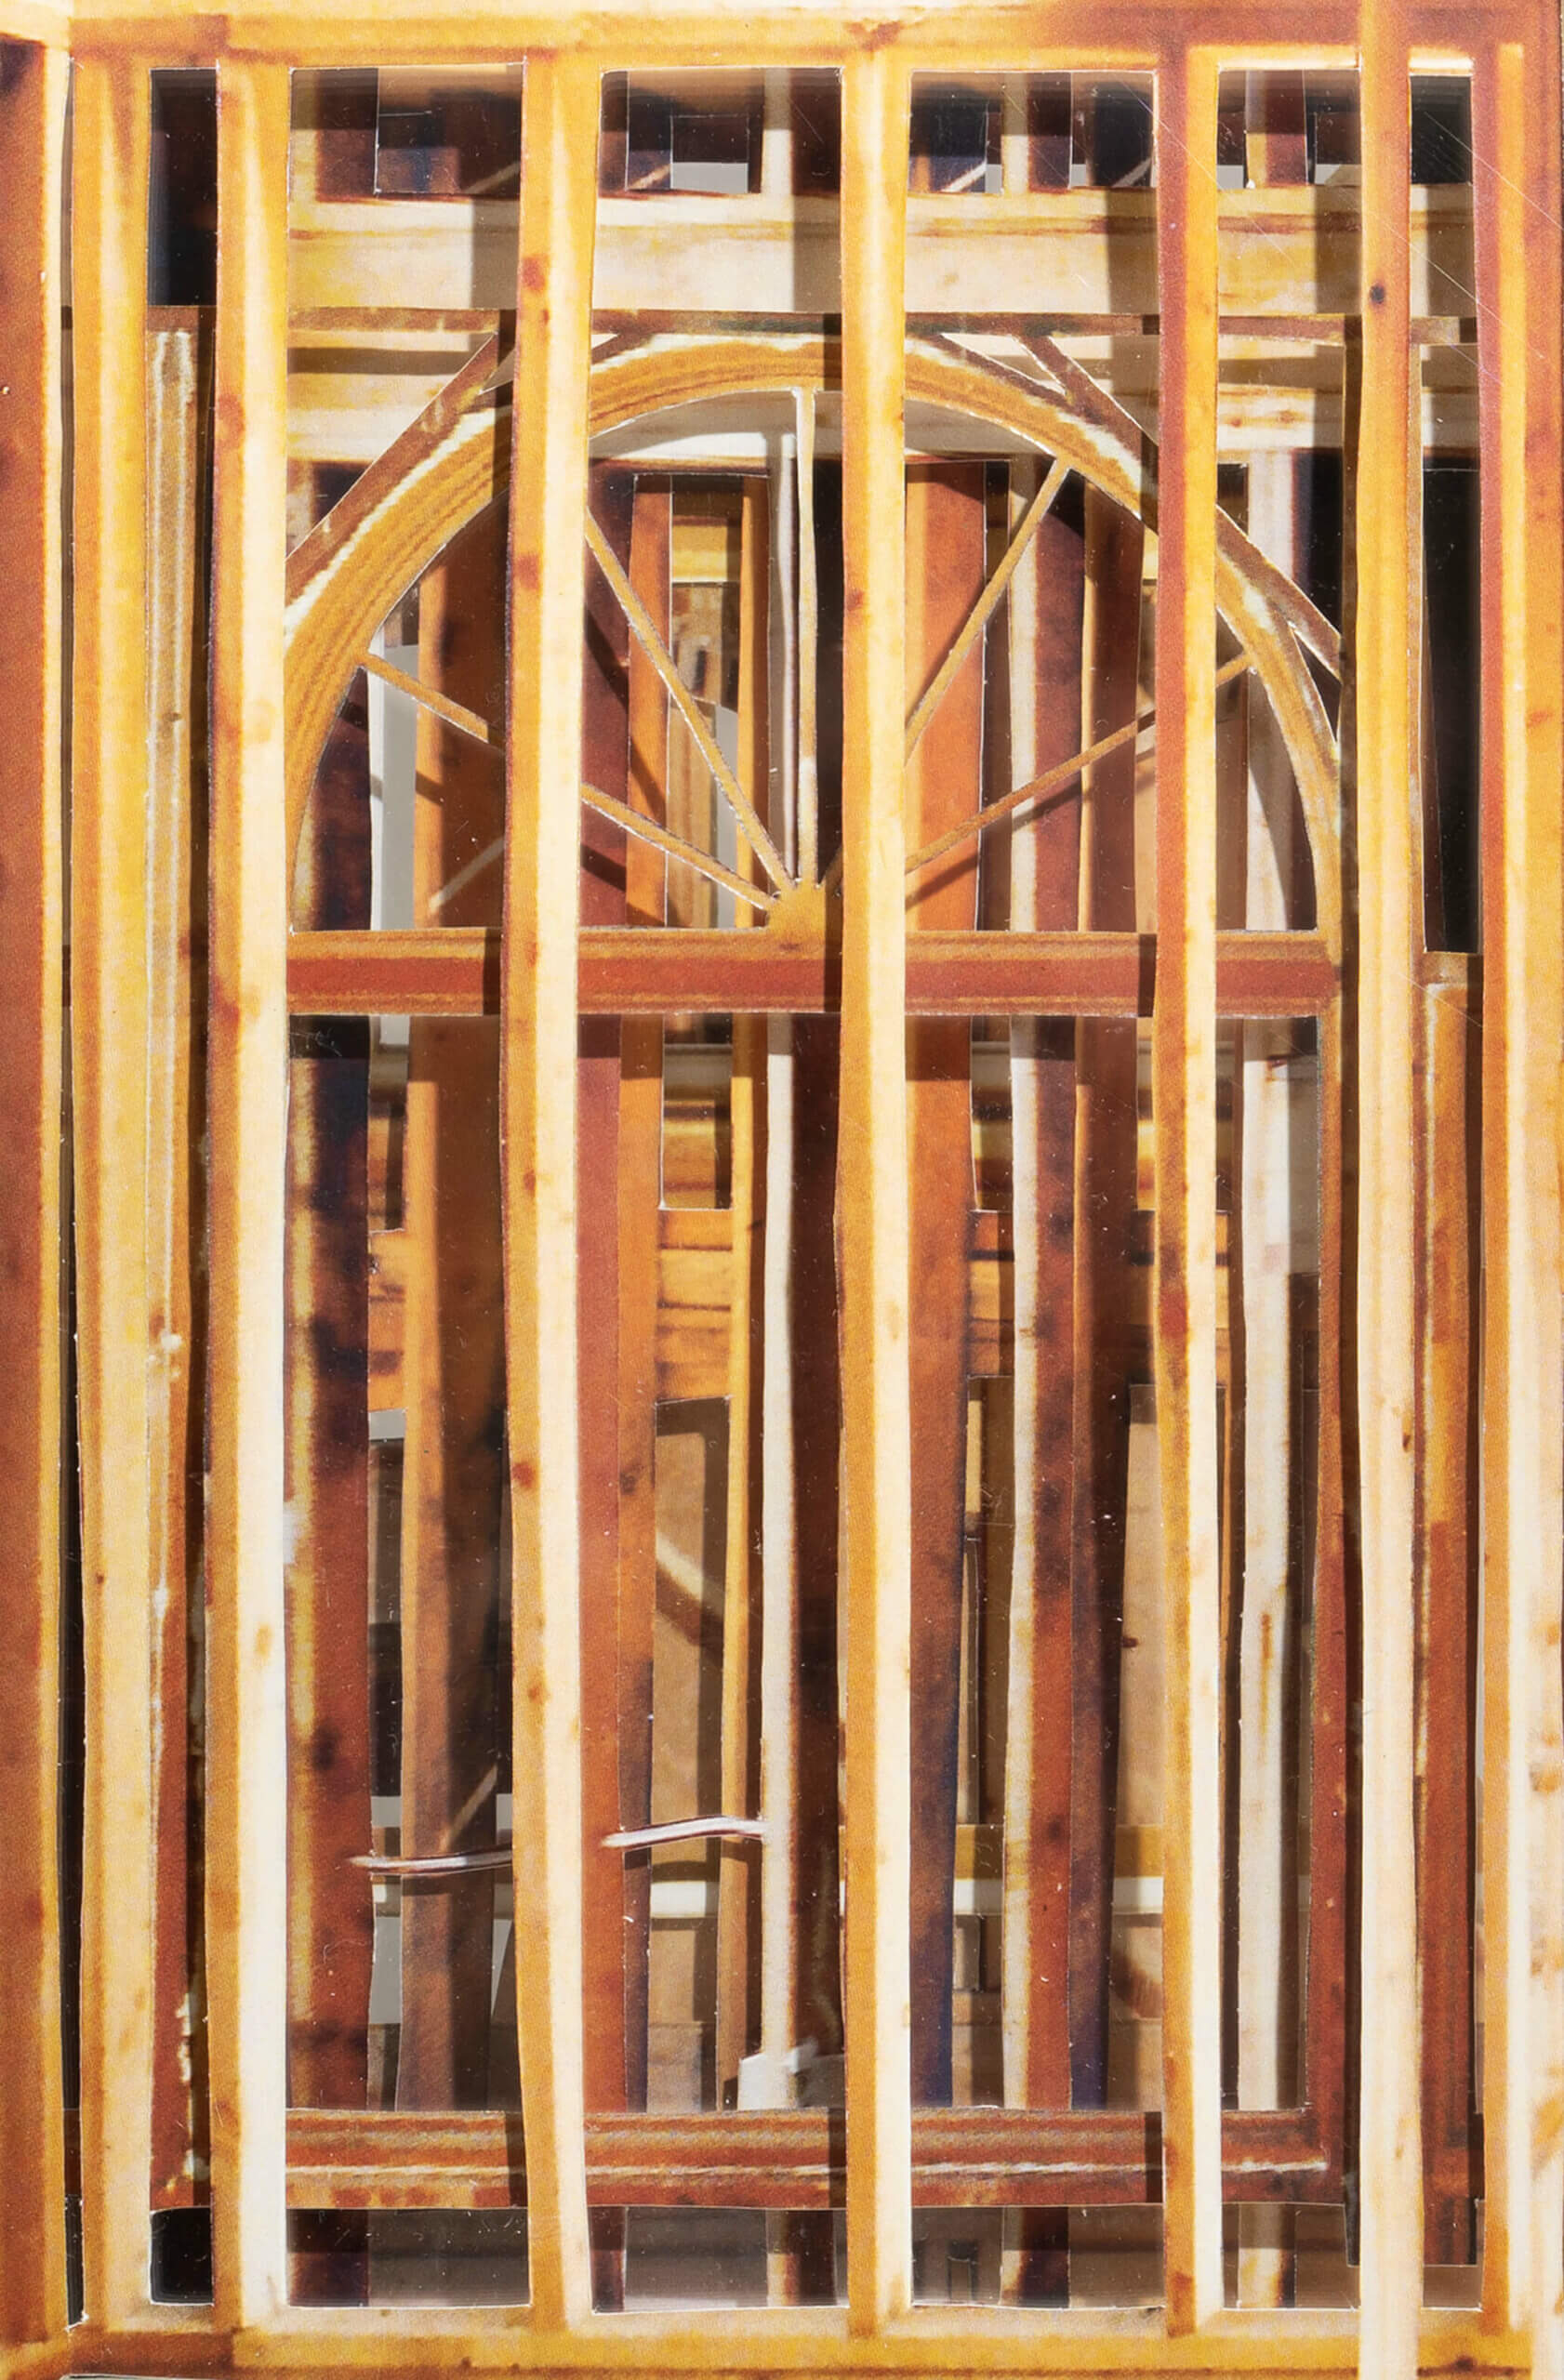 A collage of wooden struts and support beams reveals the frame of a house. The perspective is such that the house feels condensed; all that appears are familiar architectural shapes layed on top of each other, achieving a novel effect.